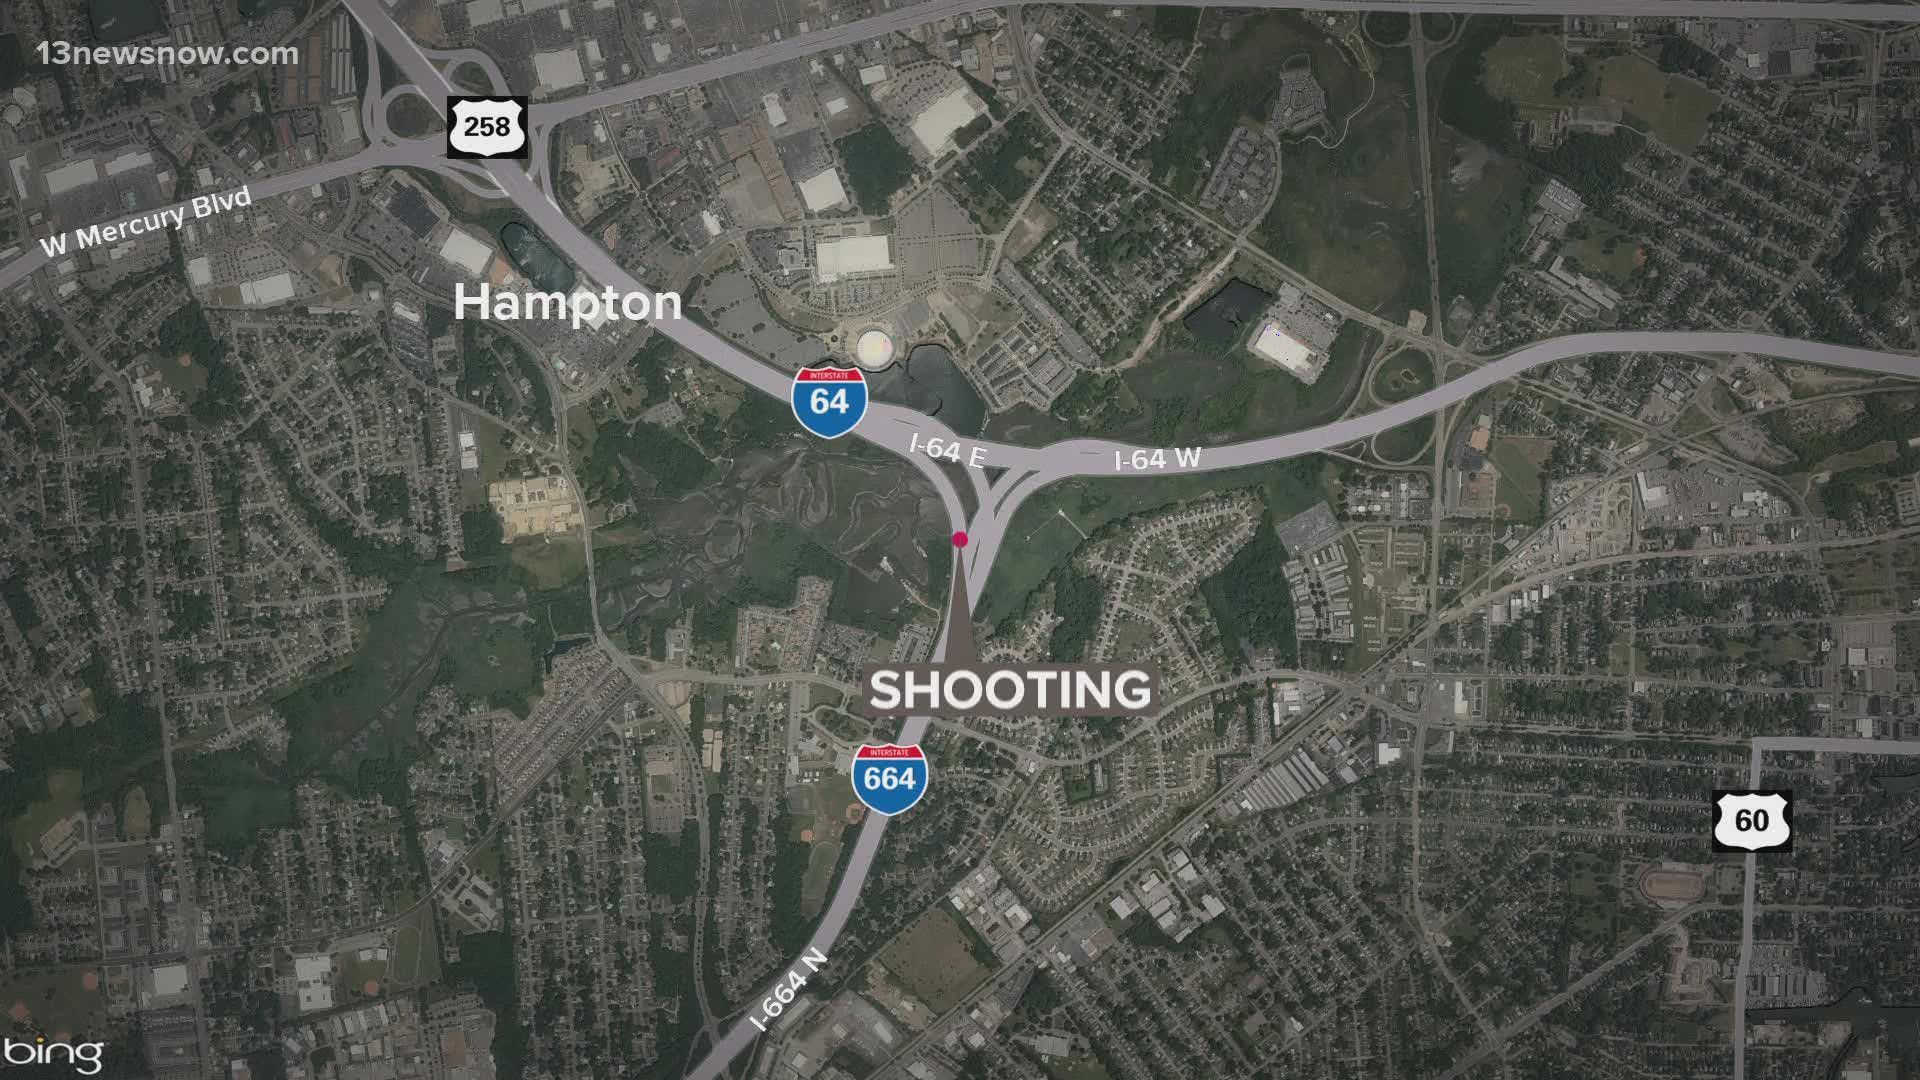 This is the 10th interstate shooting across Hampton Roads that 13News Now has reported on in 2022, according to previous coverage.